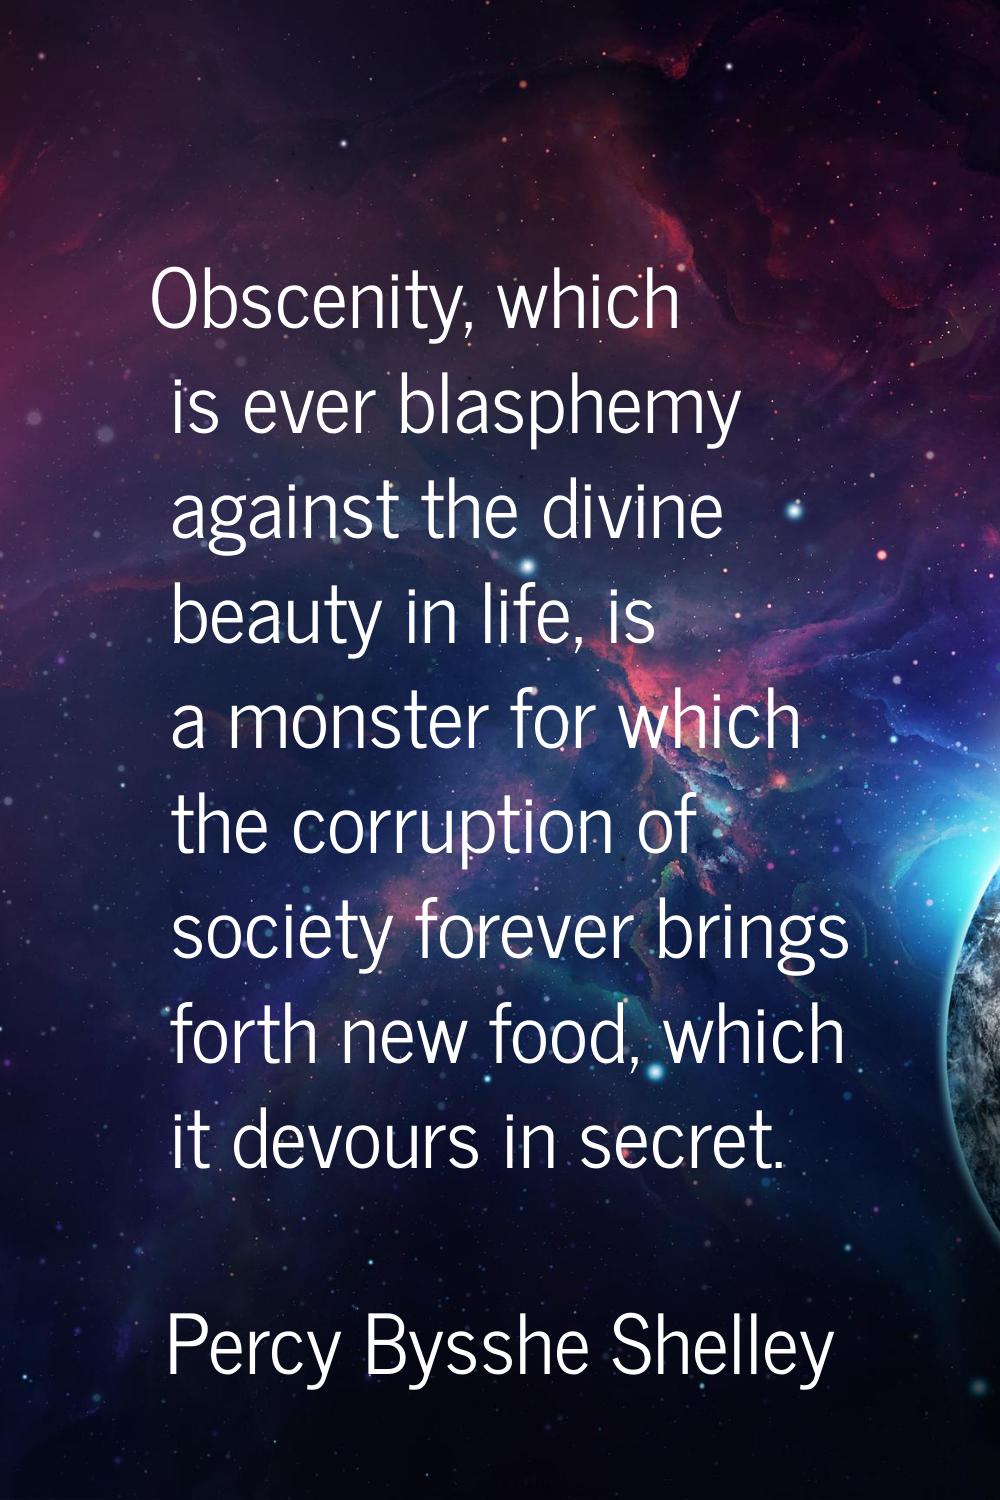 Obscenity, which is ever blasphemy against the divine beauty in life, is a monster for which the co